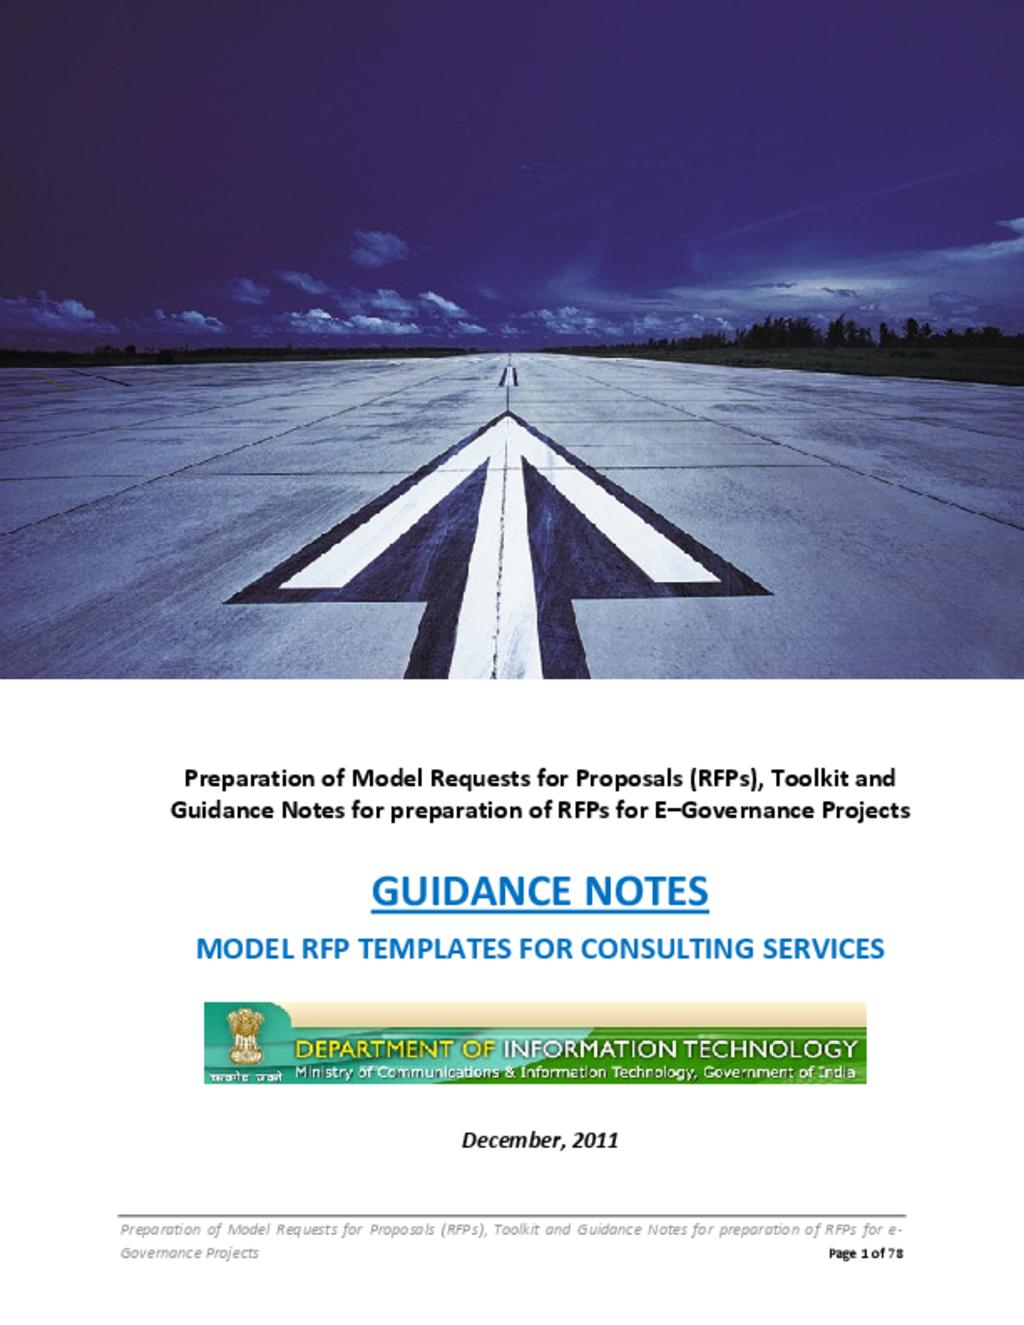 Guidance Notes: Model RFP Templates for Consulting Services